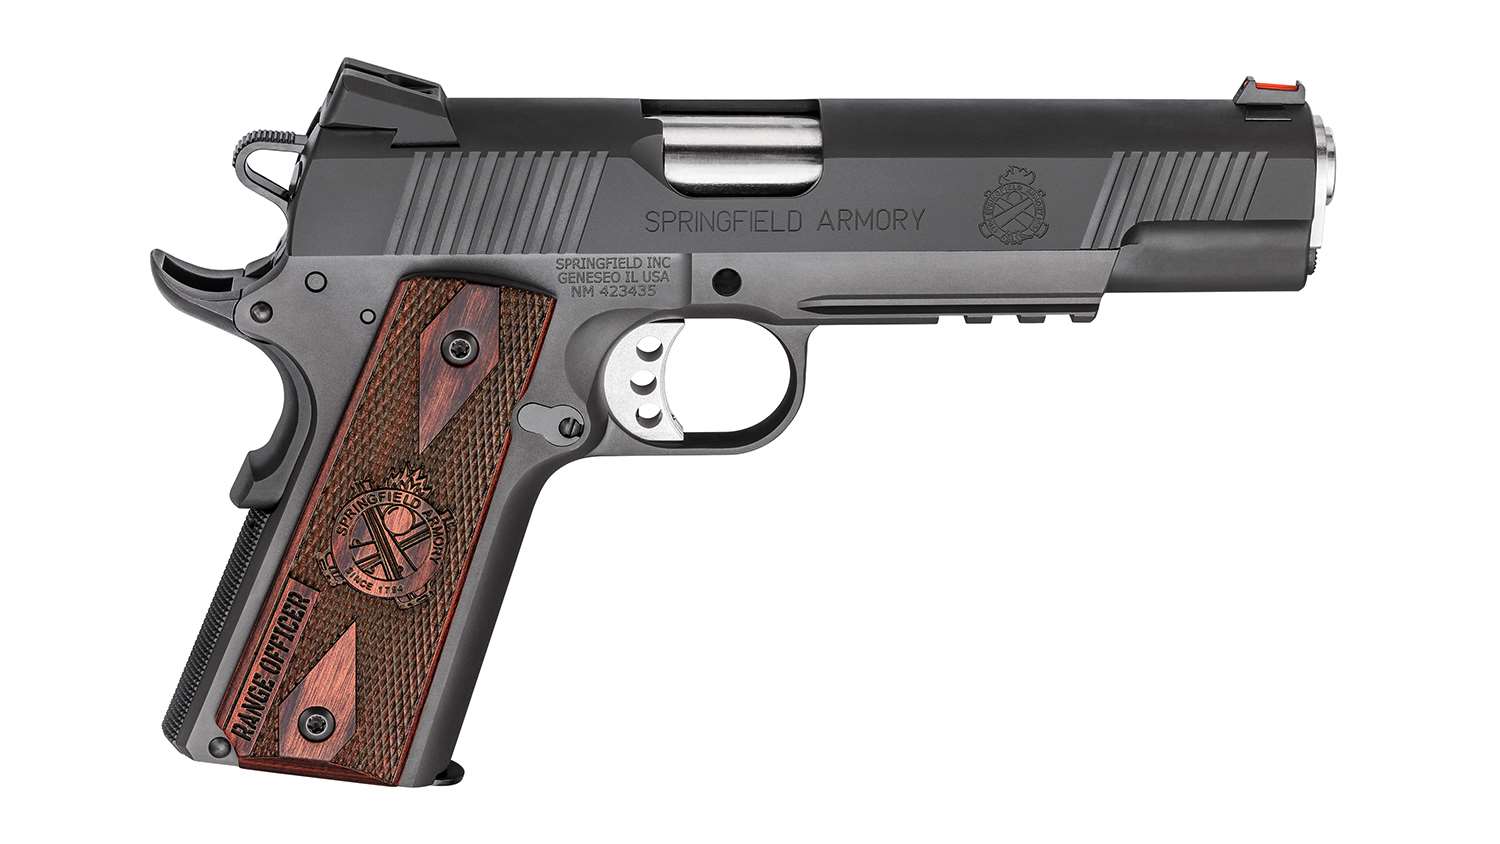 Springfield Armory 1911 Range Officer USPSA top choice for Single Stack